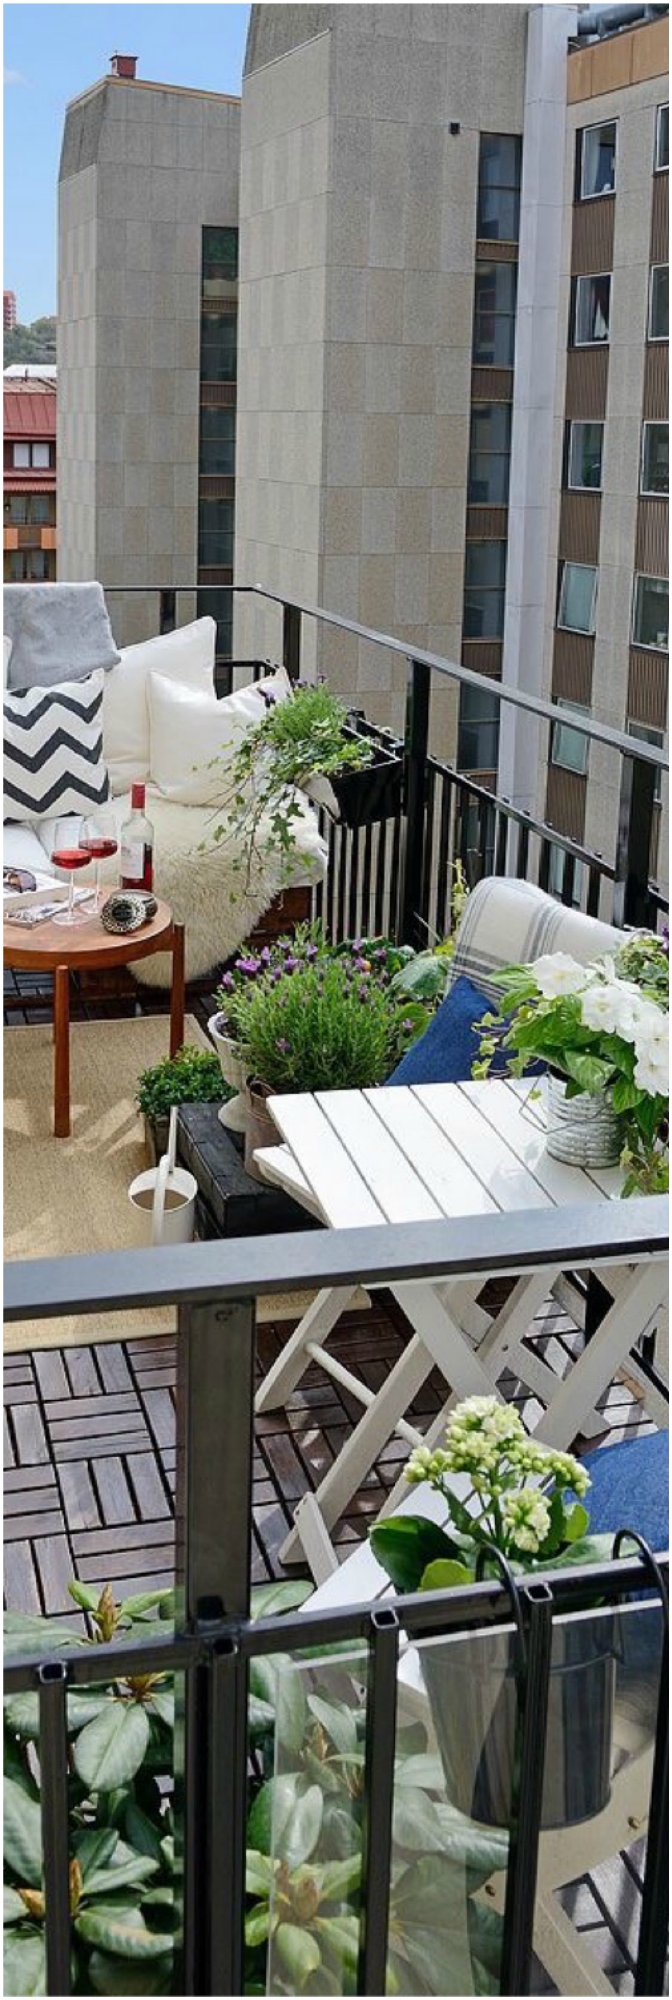 Small Balcony Garden With Sufficient Seating Area